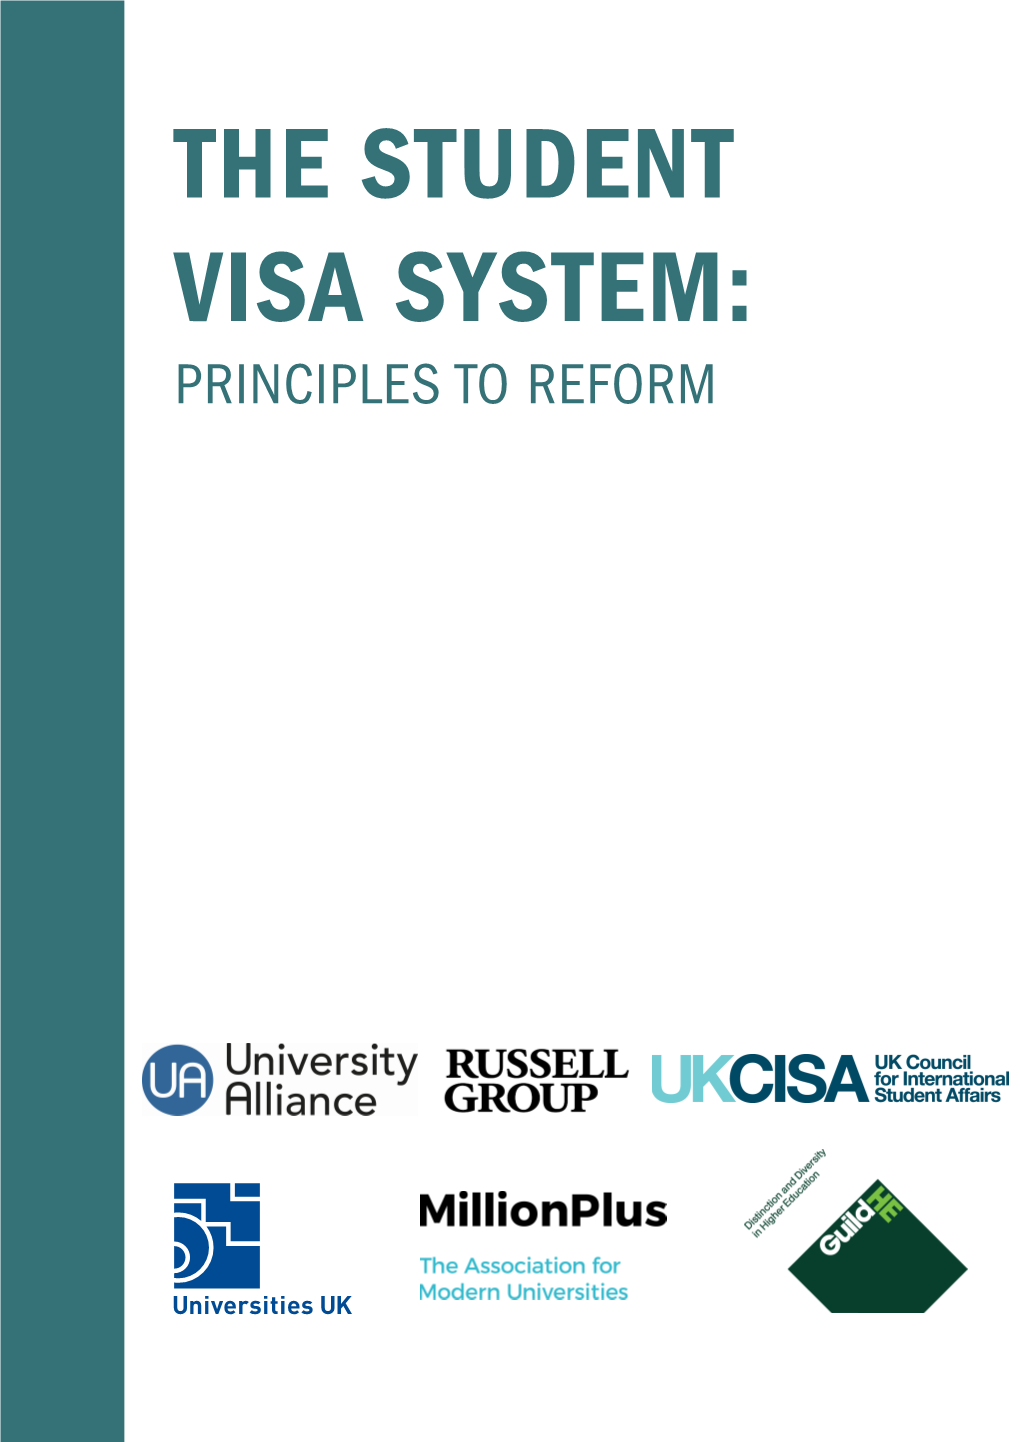 The Student Visa System: Principles to Reform